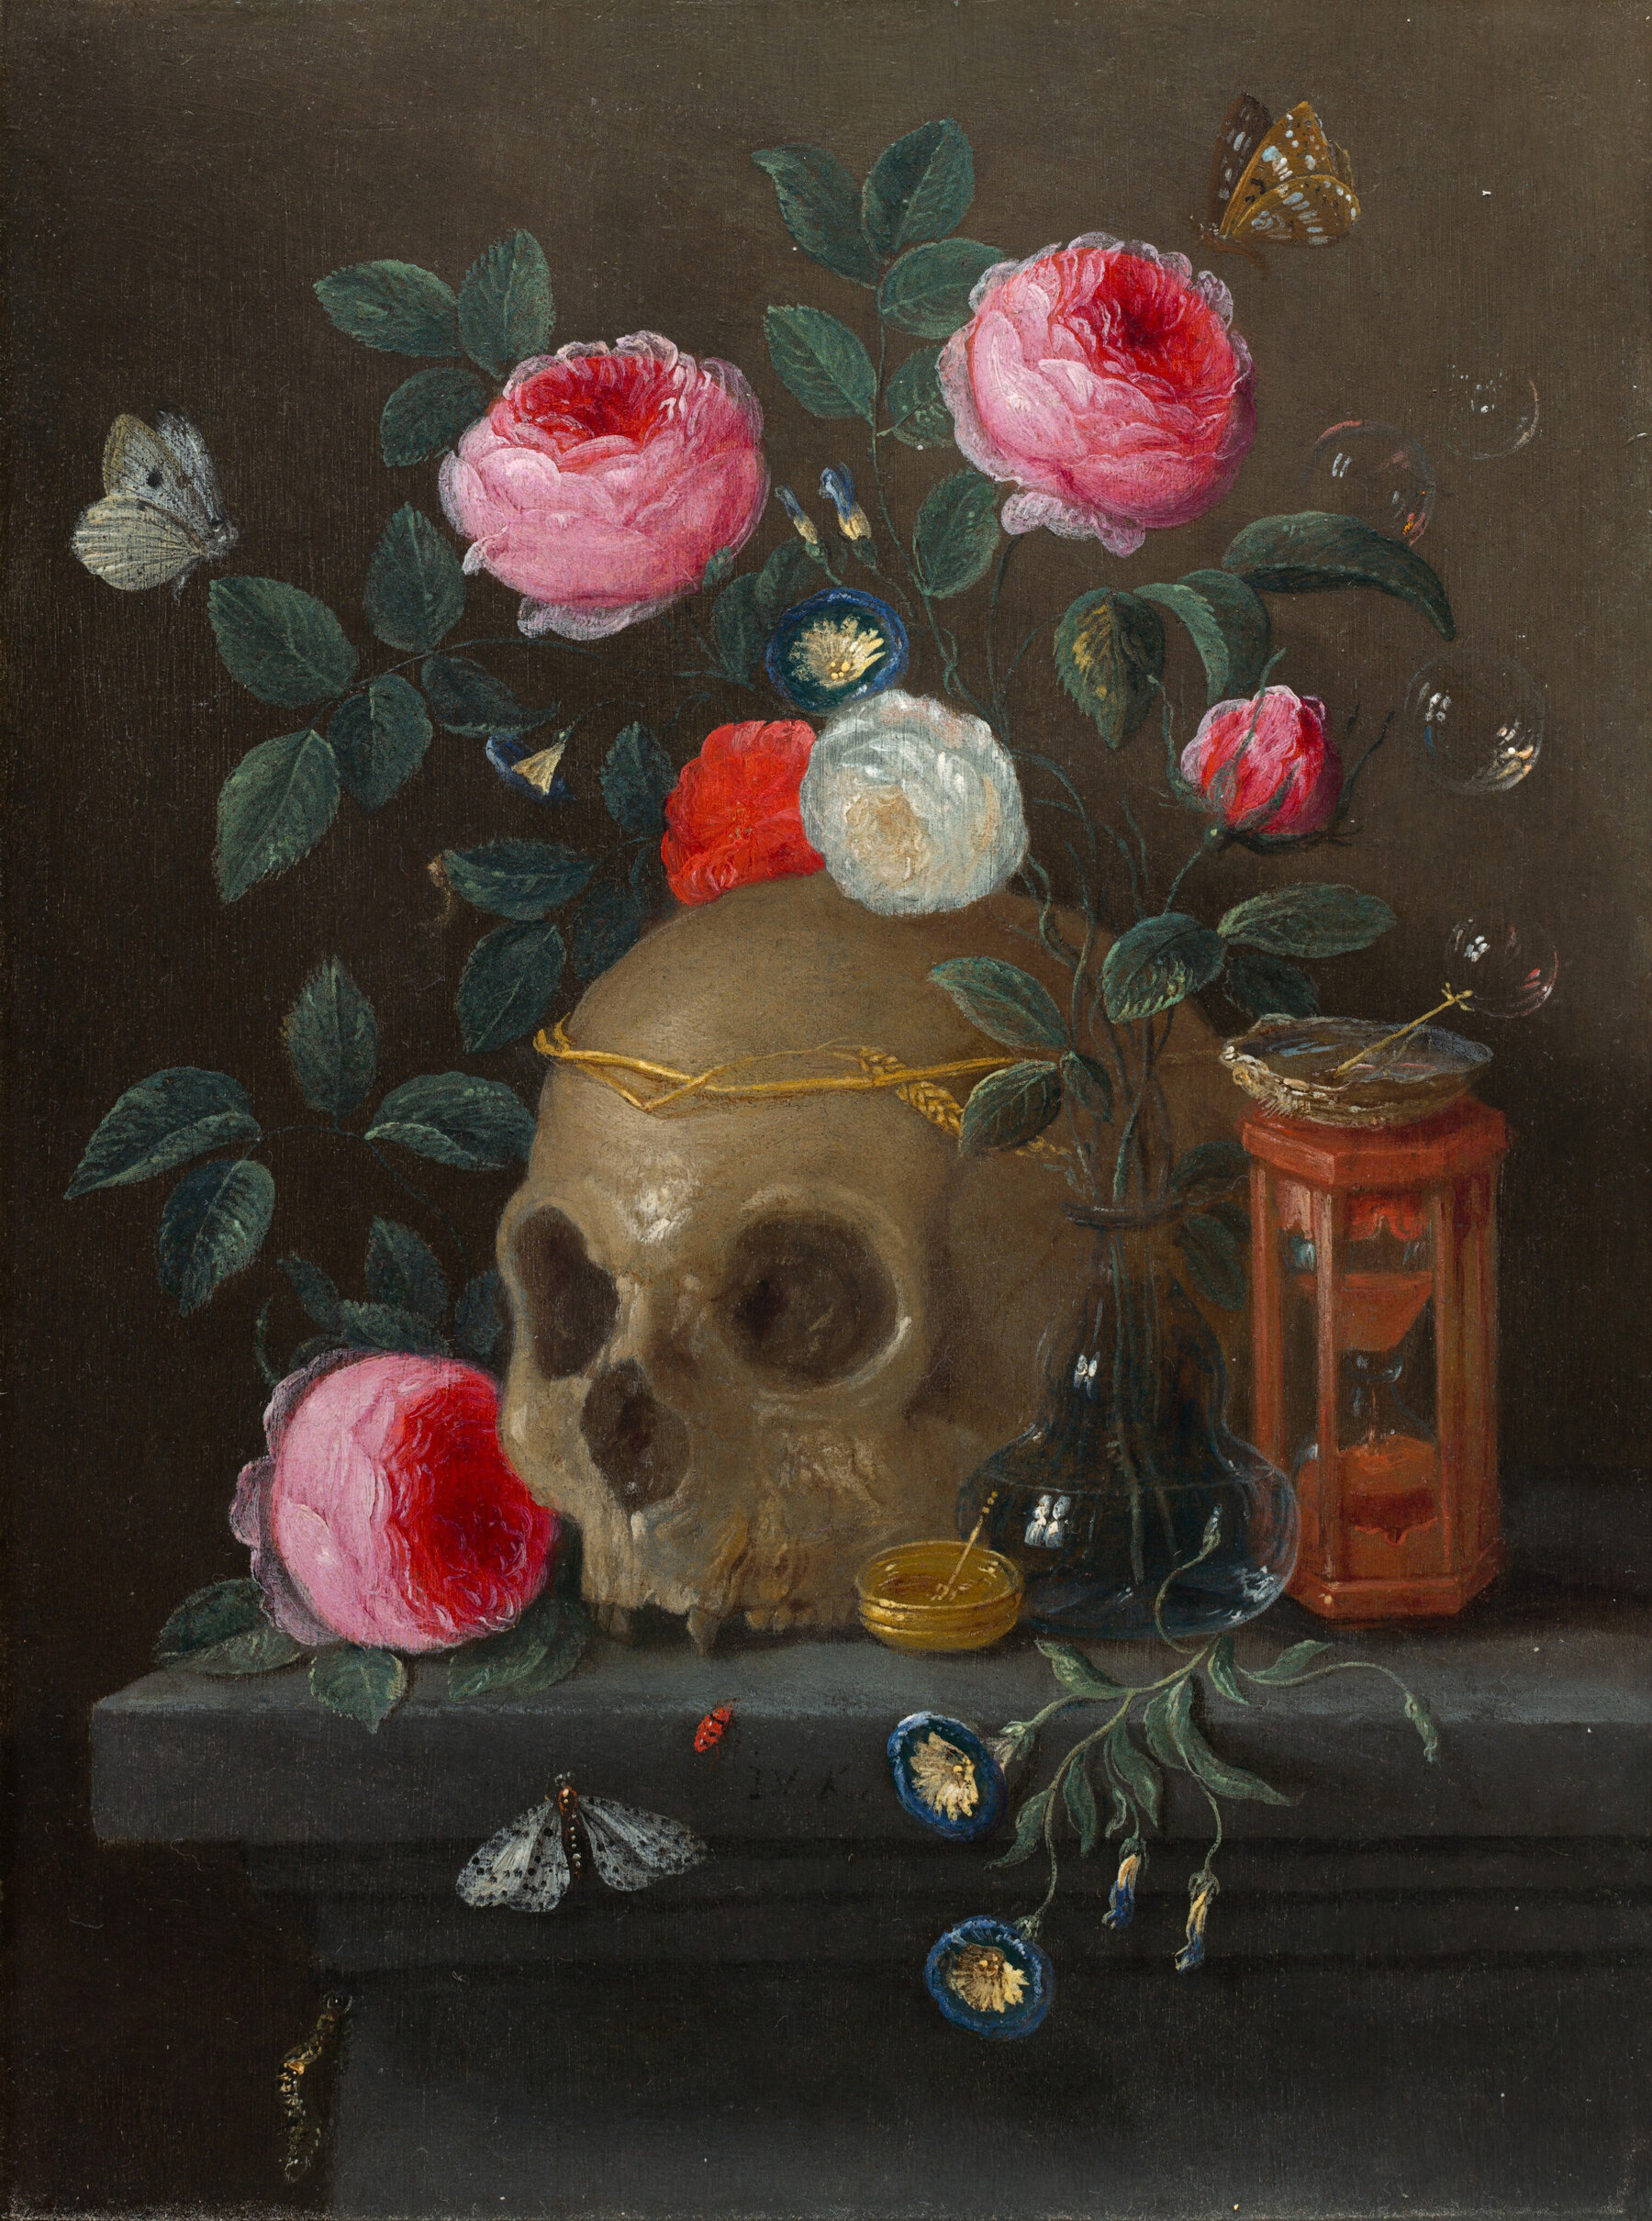 A painting of a skull next to an hourglass with flowers, butterflies and bubbles around it.